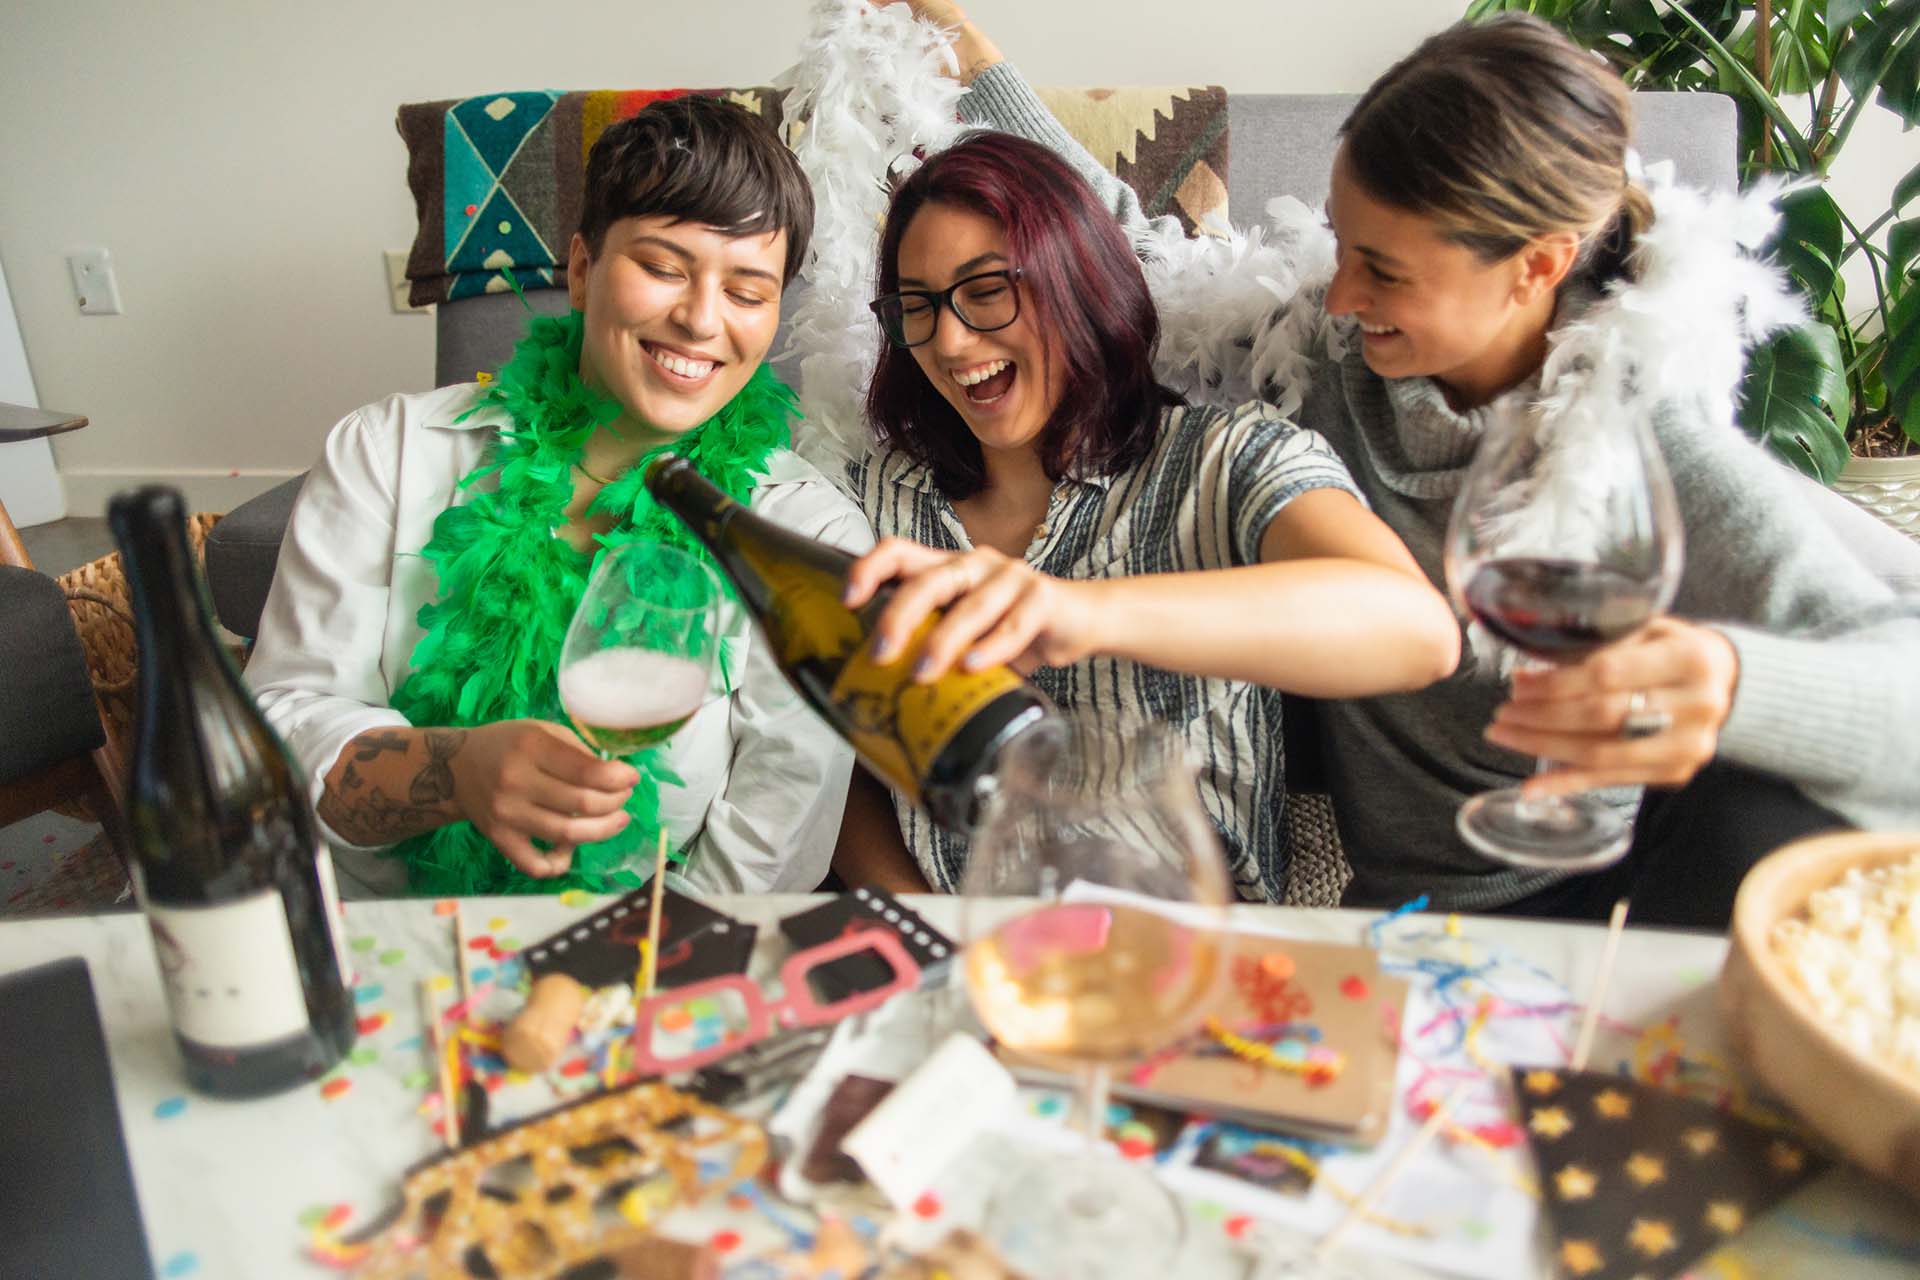 Three friends drinking Brooks Sparkling wine while celebrating with party embellishments